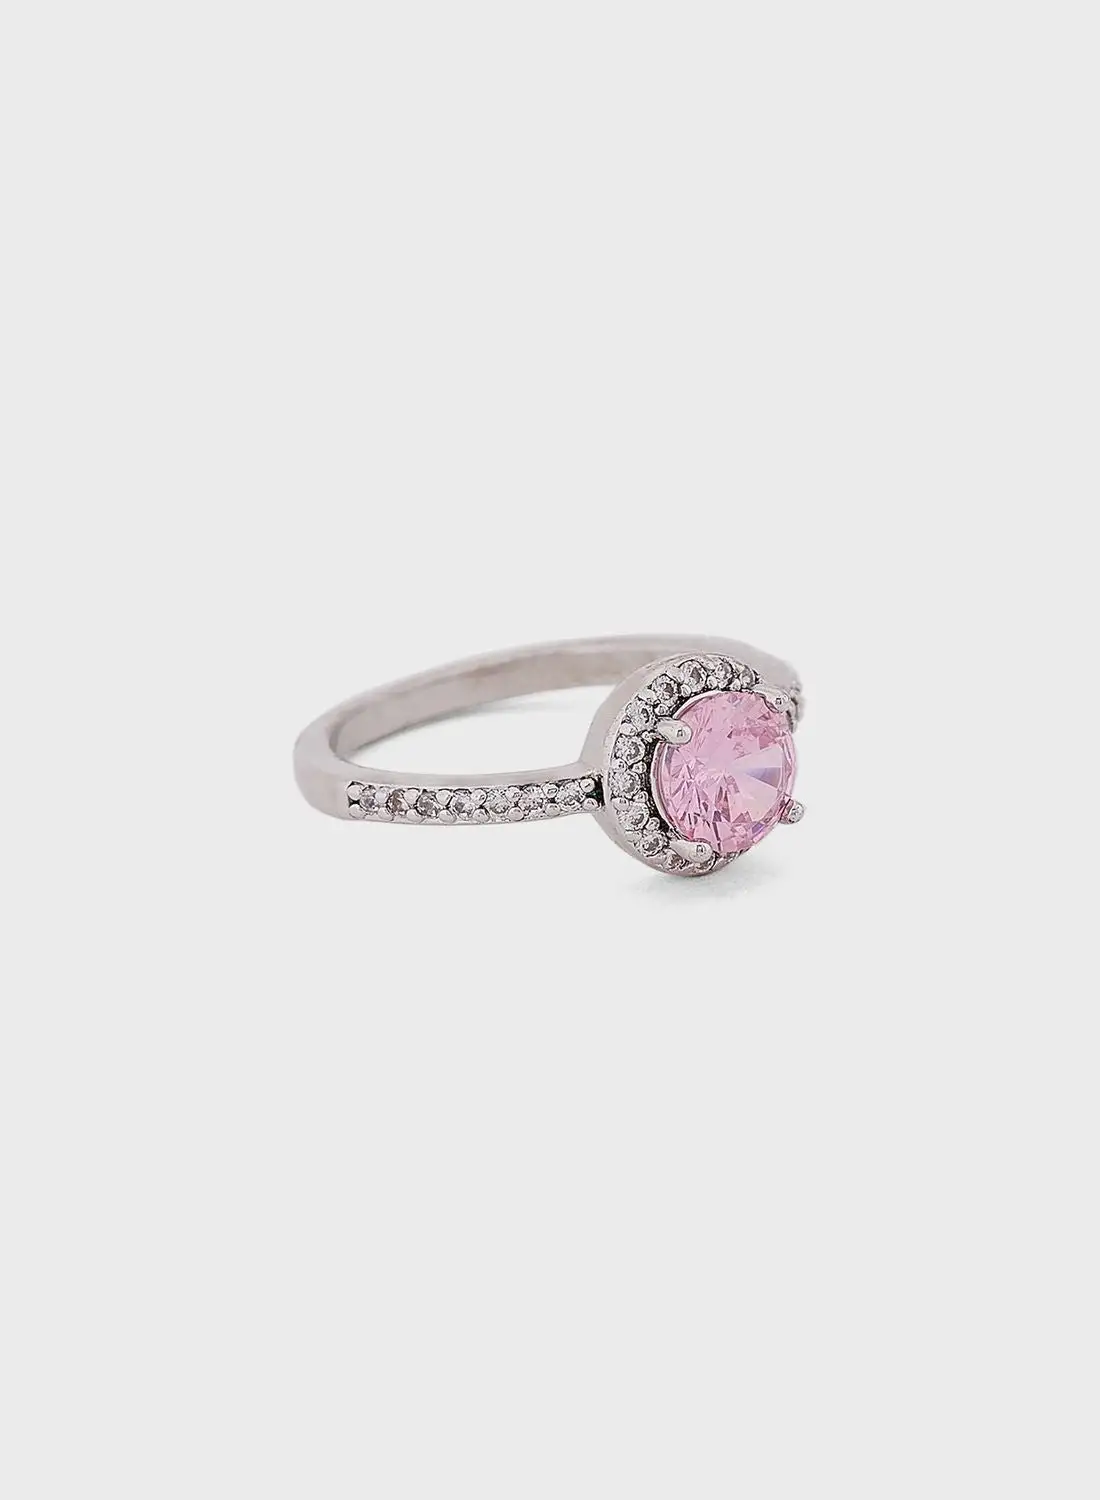 BUCKLEY LONDON Pink Halo Ring